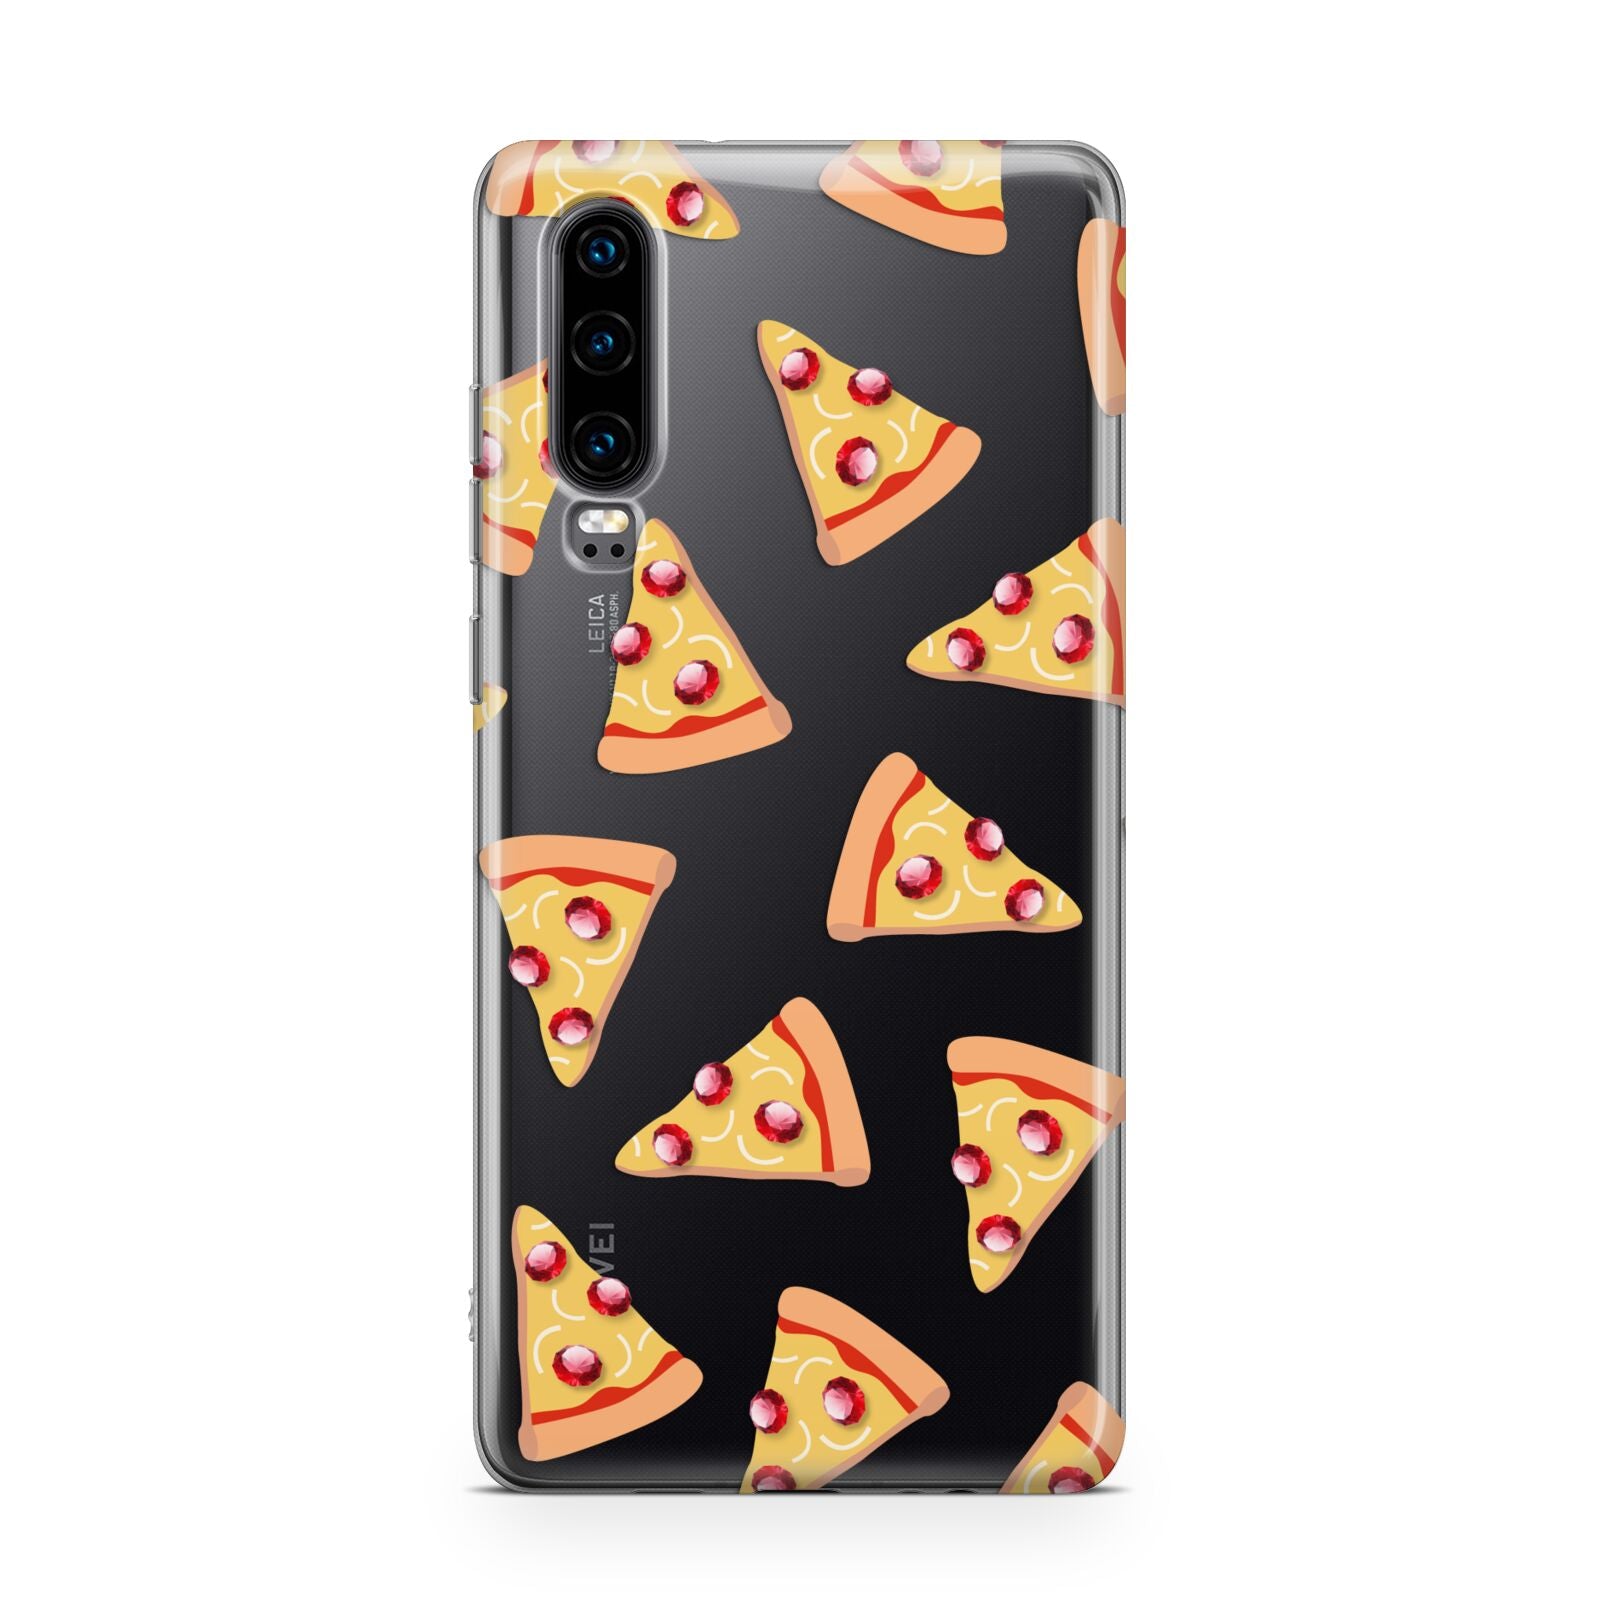 Rubies on Cartoon Pizza Slices Huawei P30 Phone Case